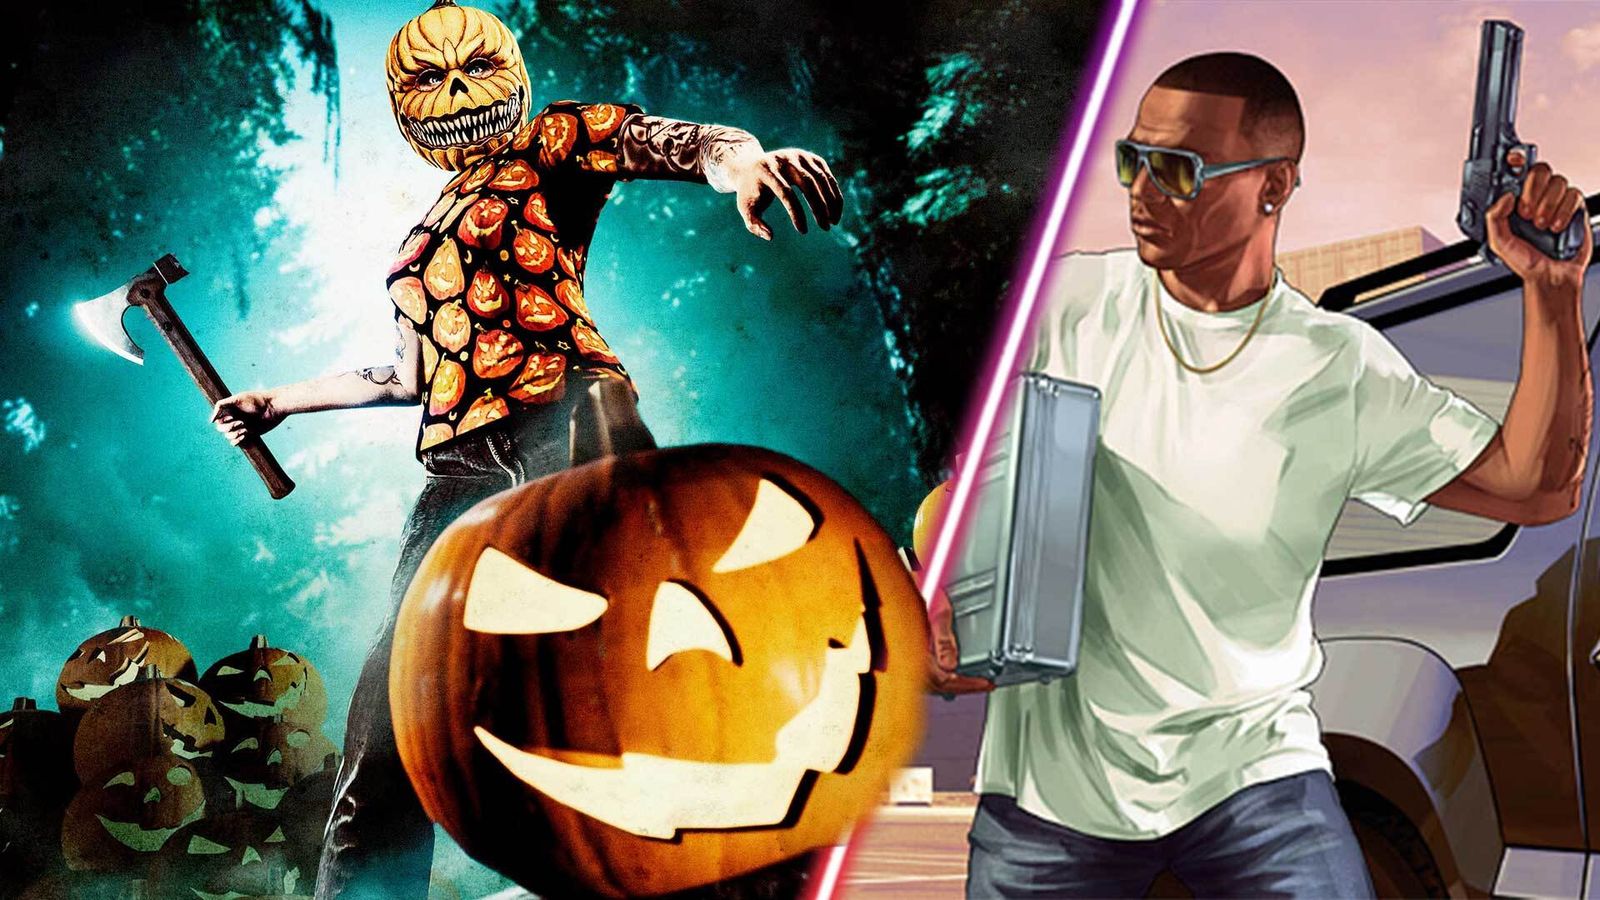 A GTA Online character in a Halloween costume.